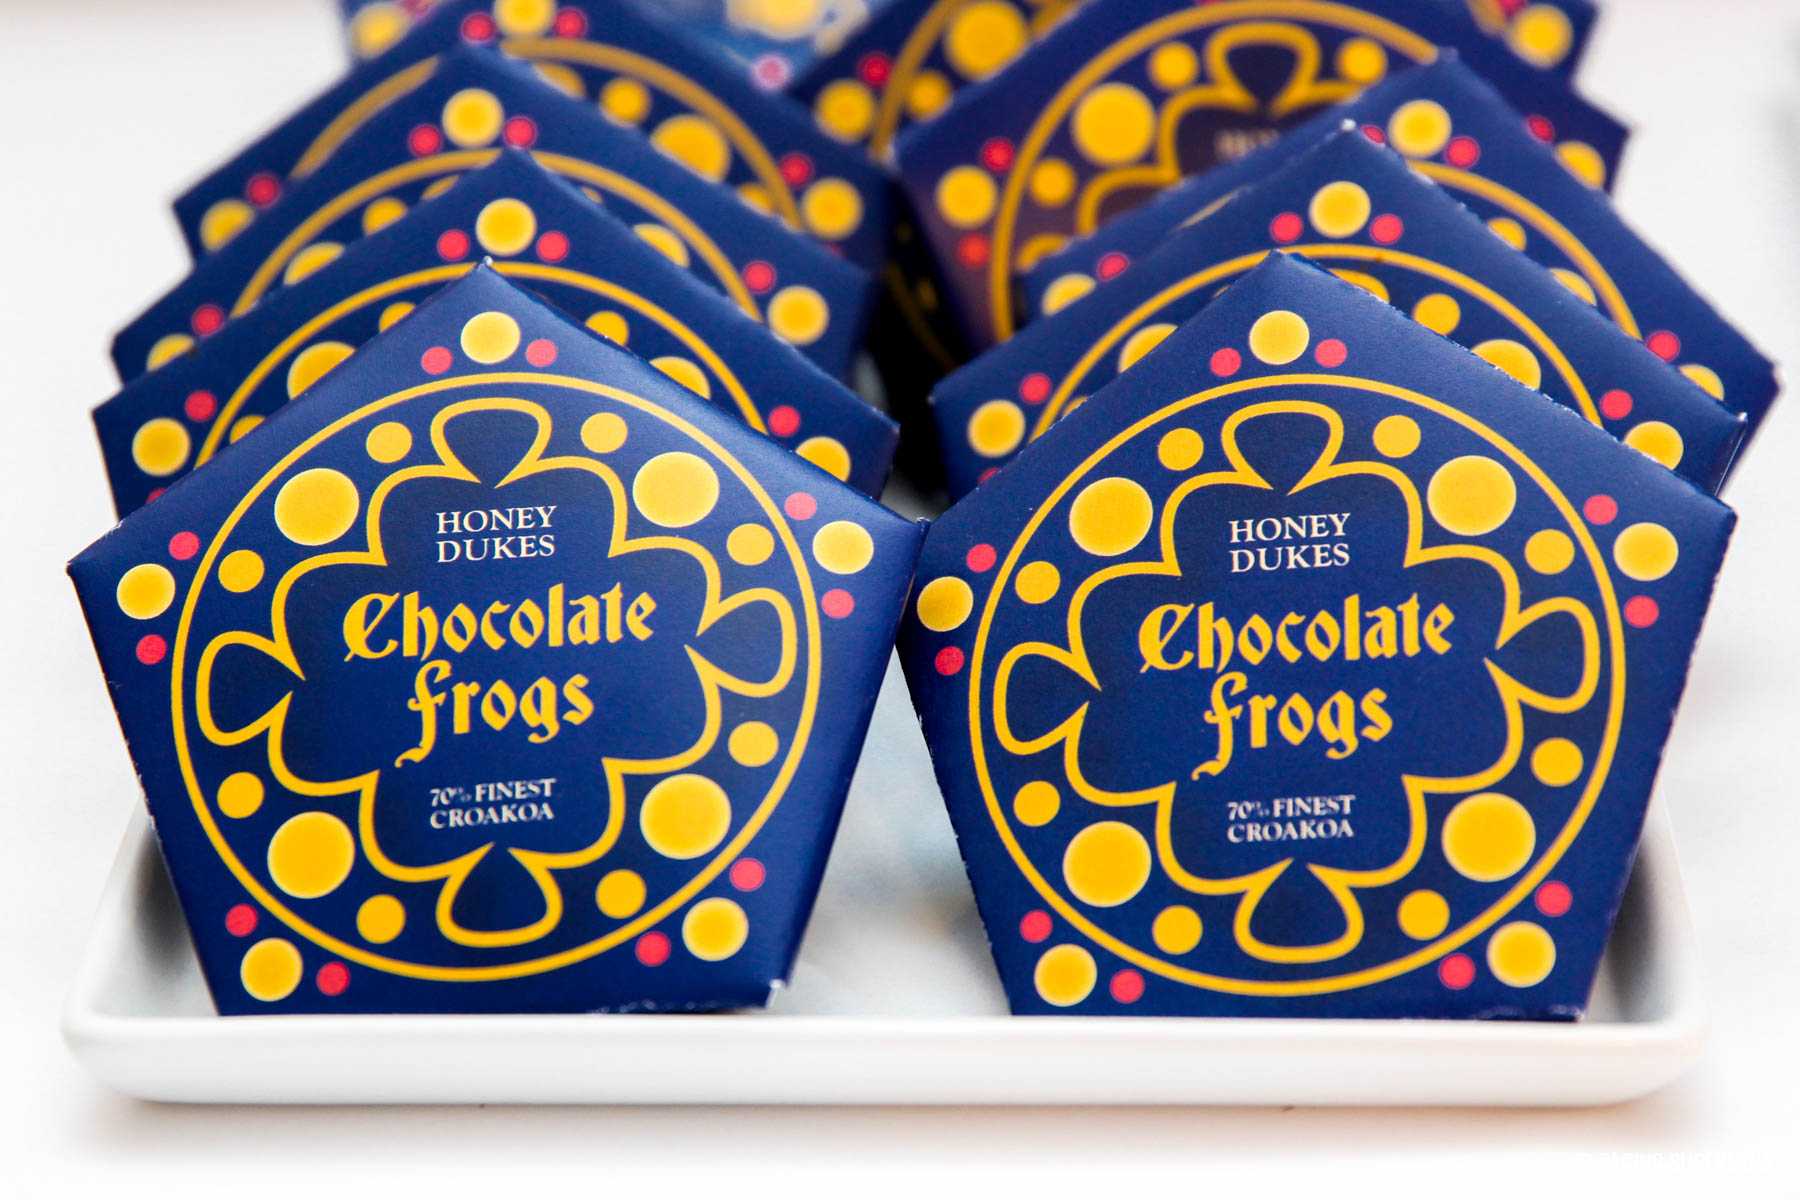 205 Chocolate Frog Box Template | Wiring Library Pertaining To Chocolate Frog Card Template